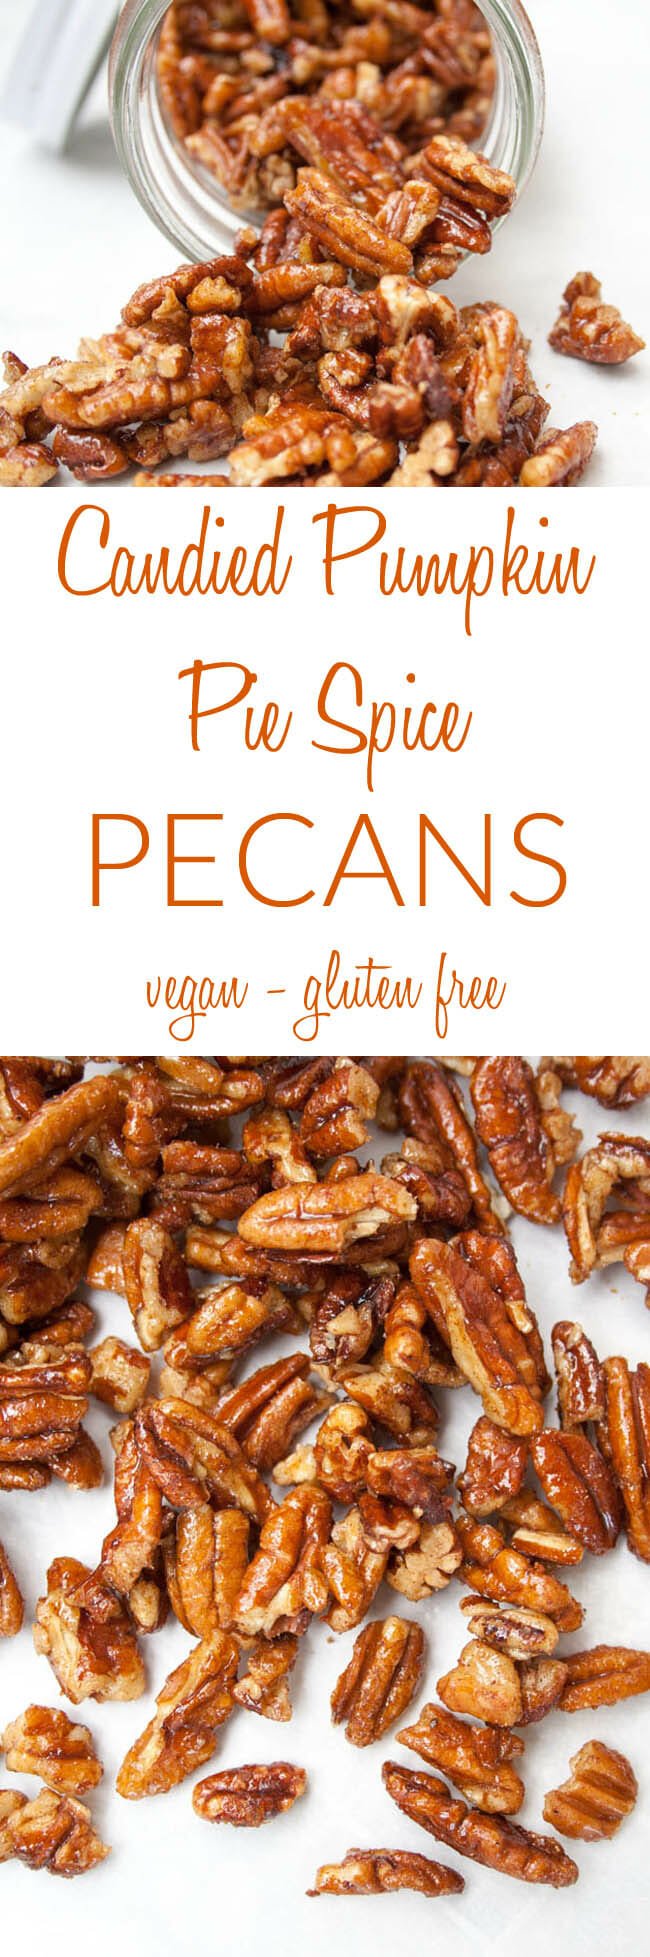 Candied Pumpkin Pie Spice Pecans collage photo with text.